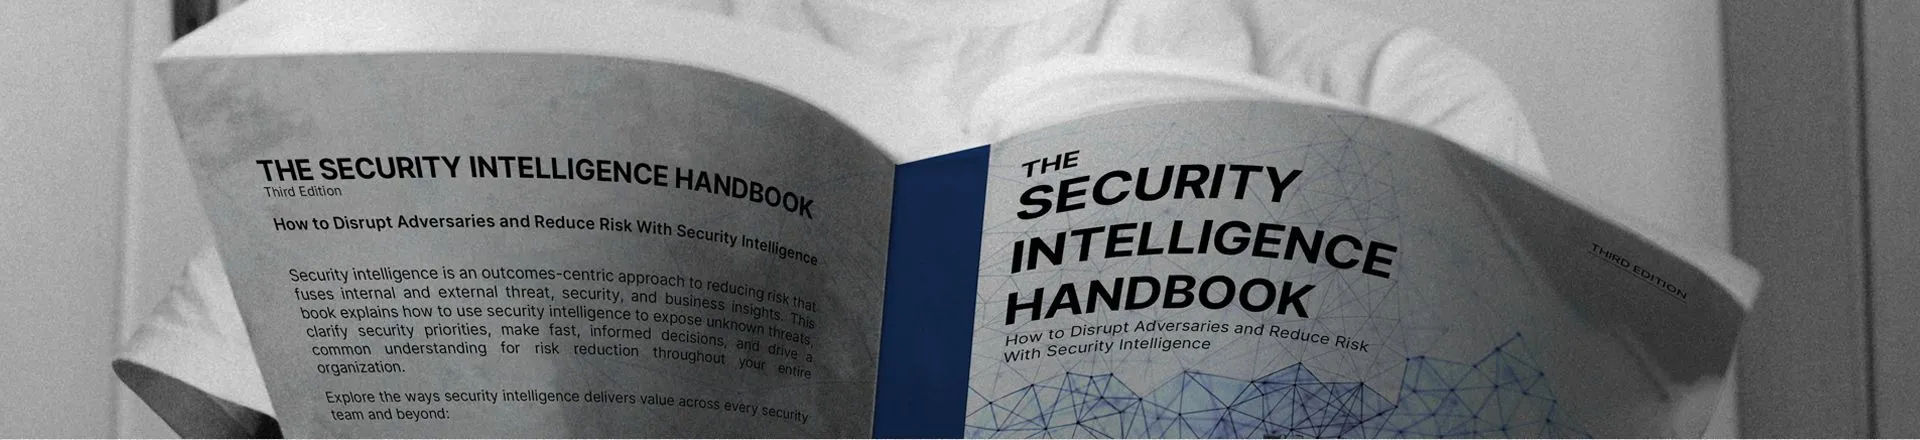 Get Your Handbook for Disrupting Adversaries and Reducing Risk